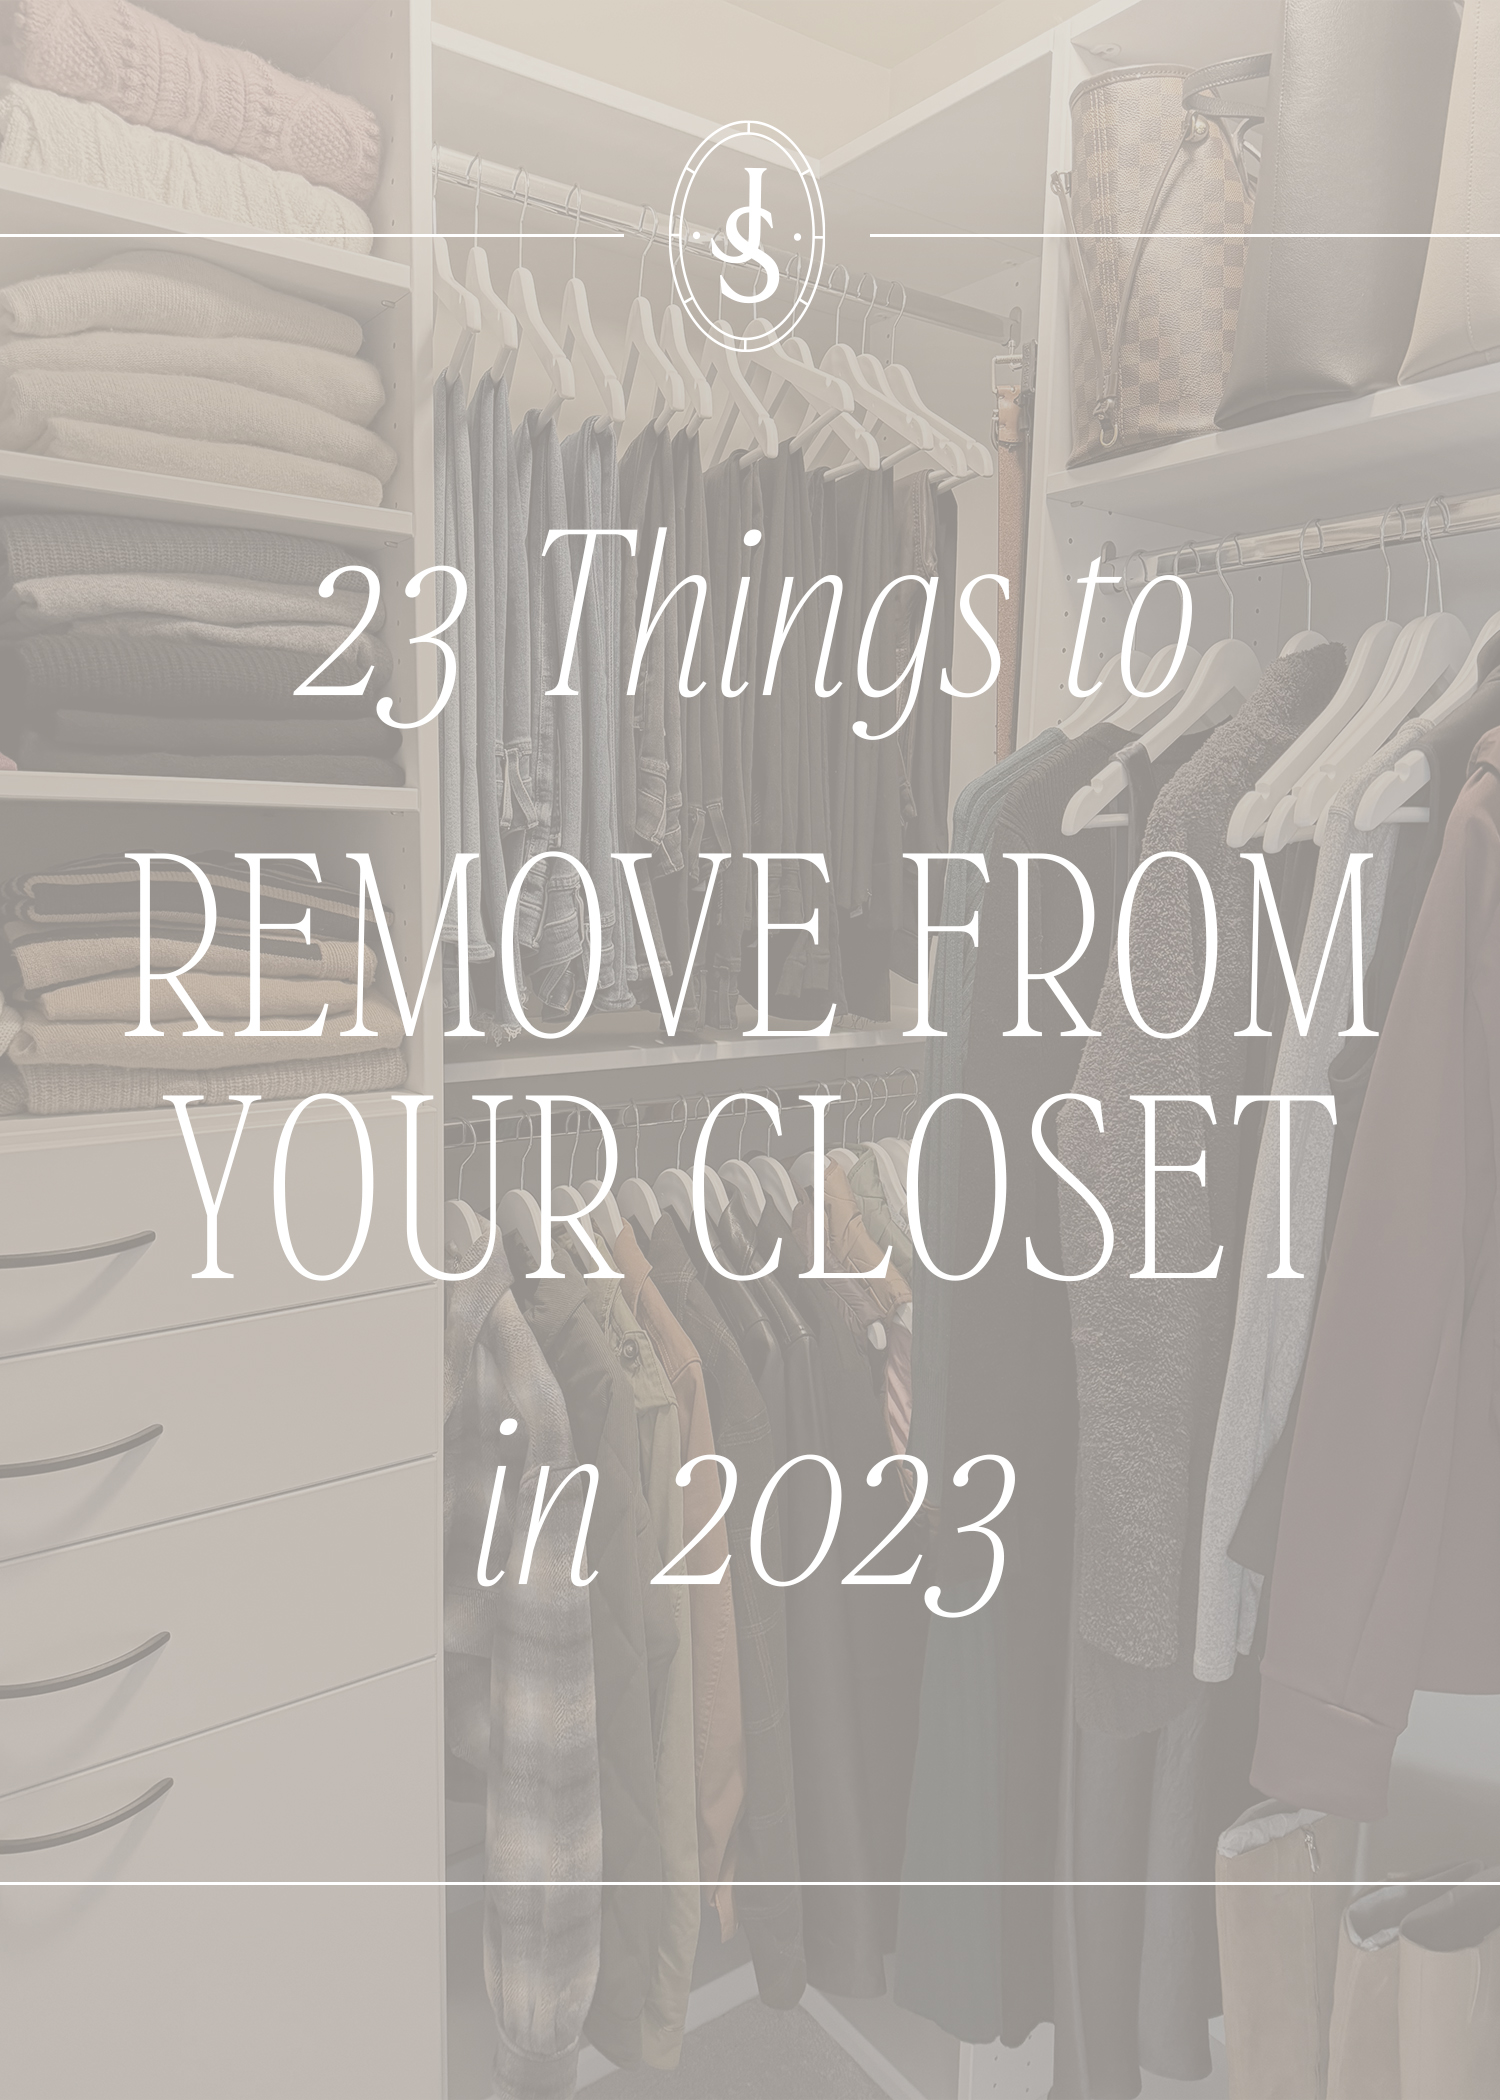 23 things to remove from your closet